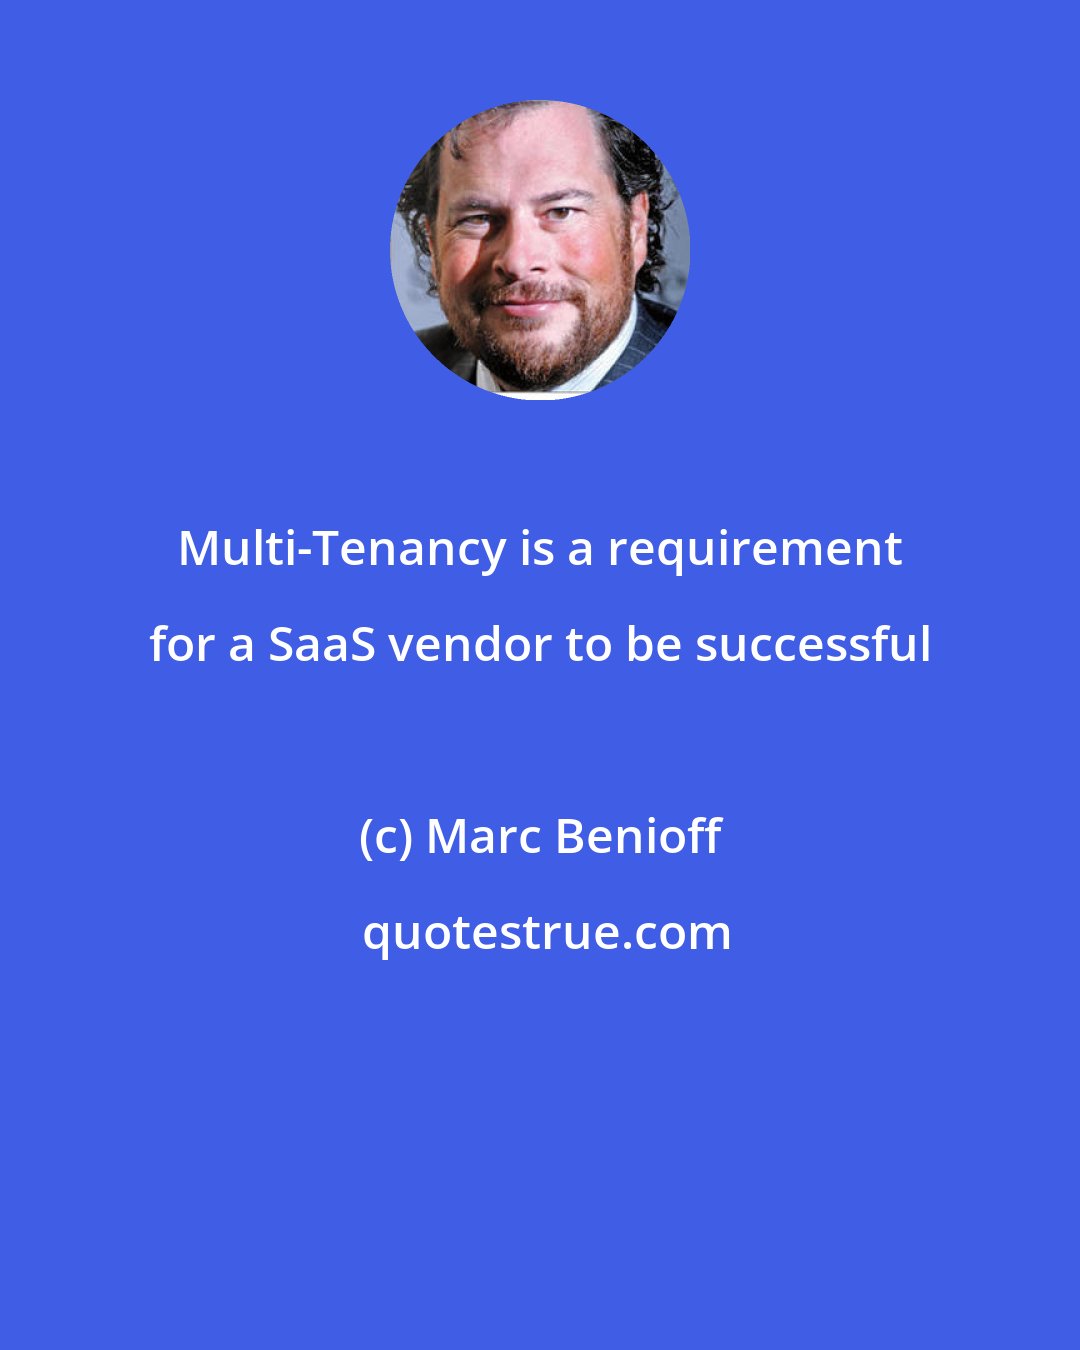 Marc Benioff: Multi-Tenancy is a requirement for a SaaS vendor to be successful